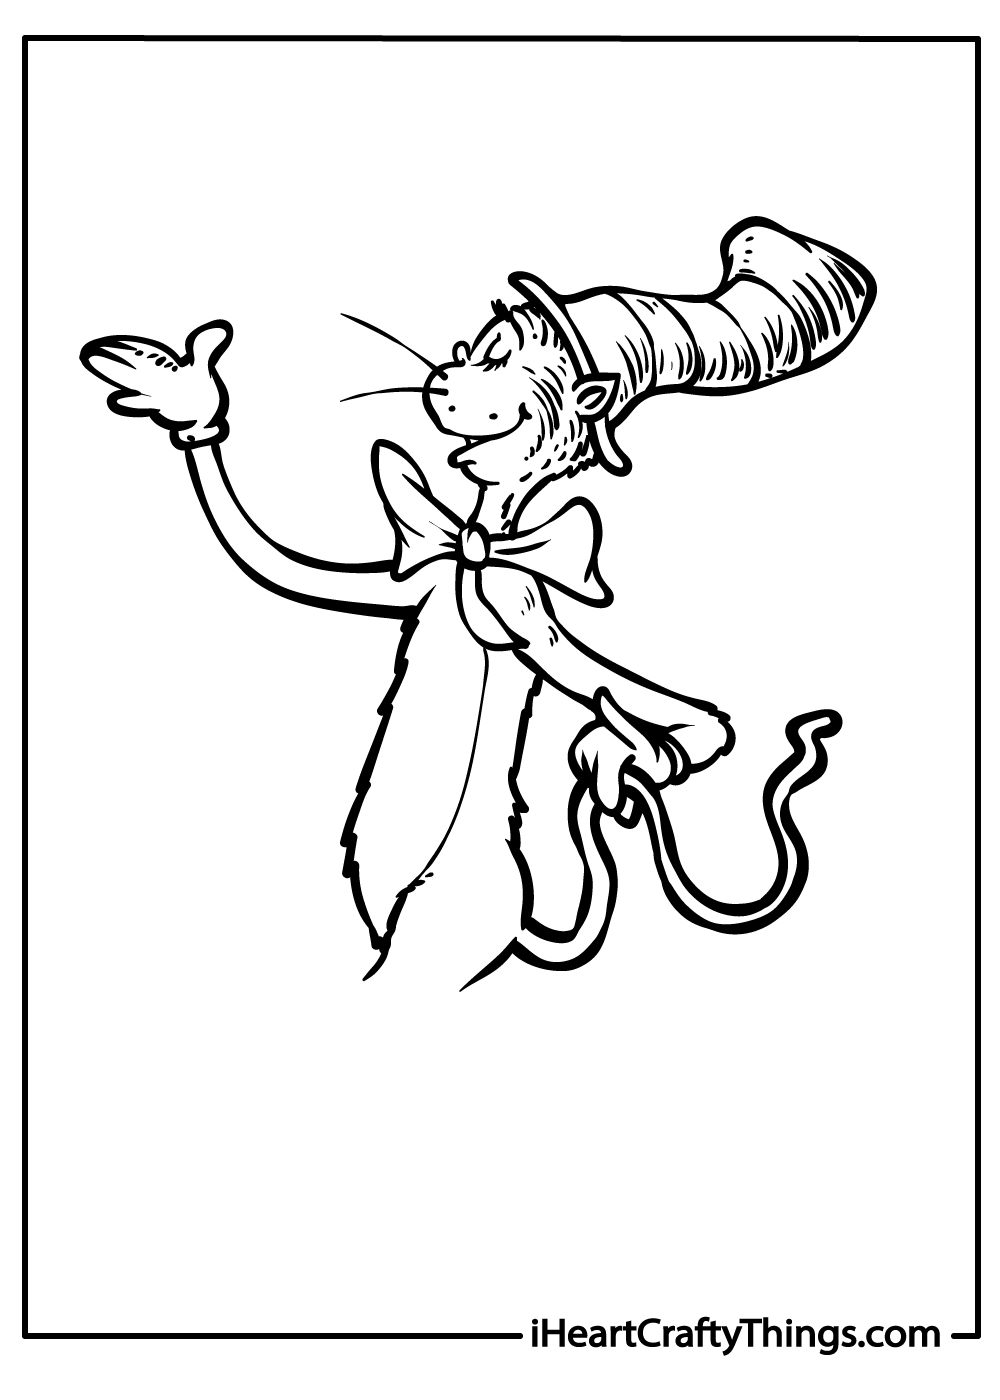 Original Cat in the Hat Coloring Pages for Kids